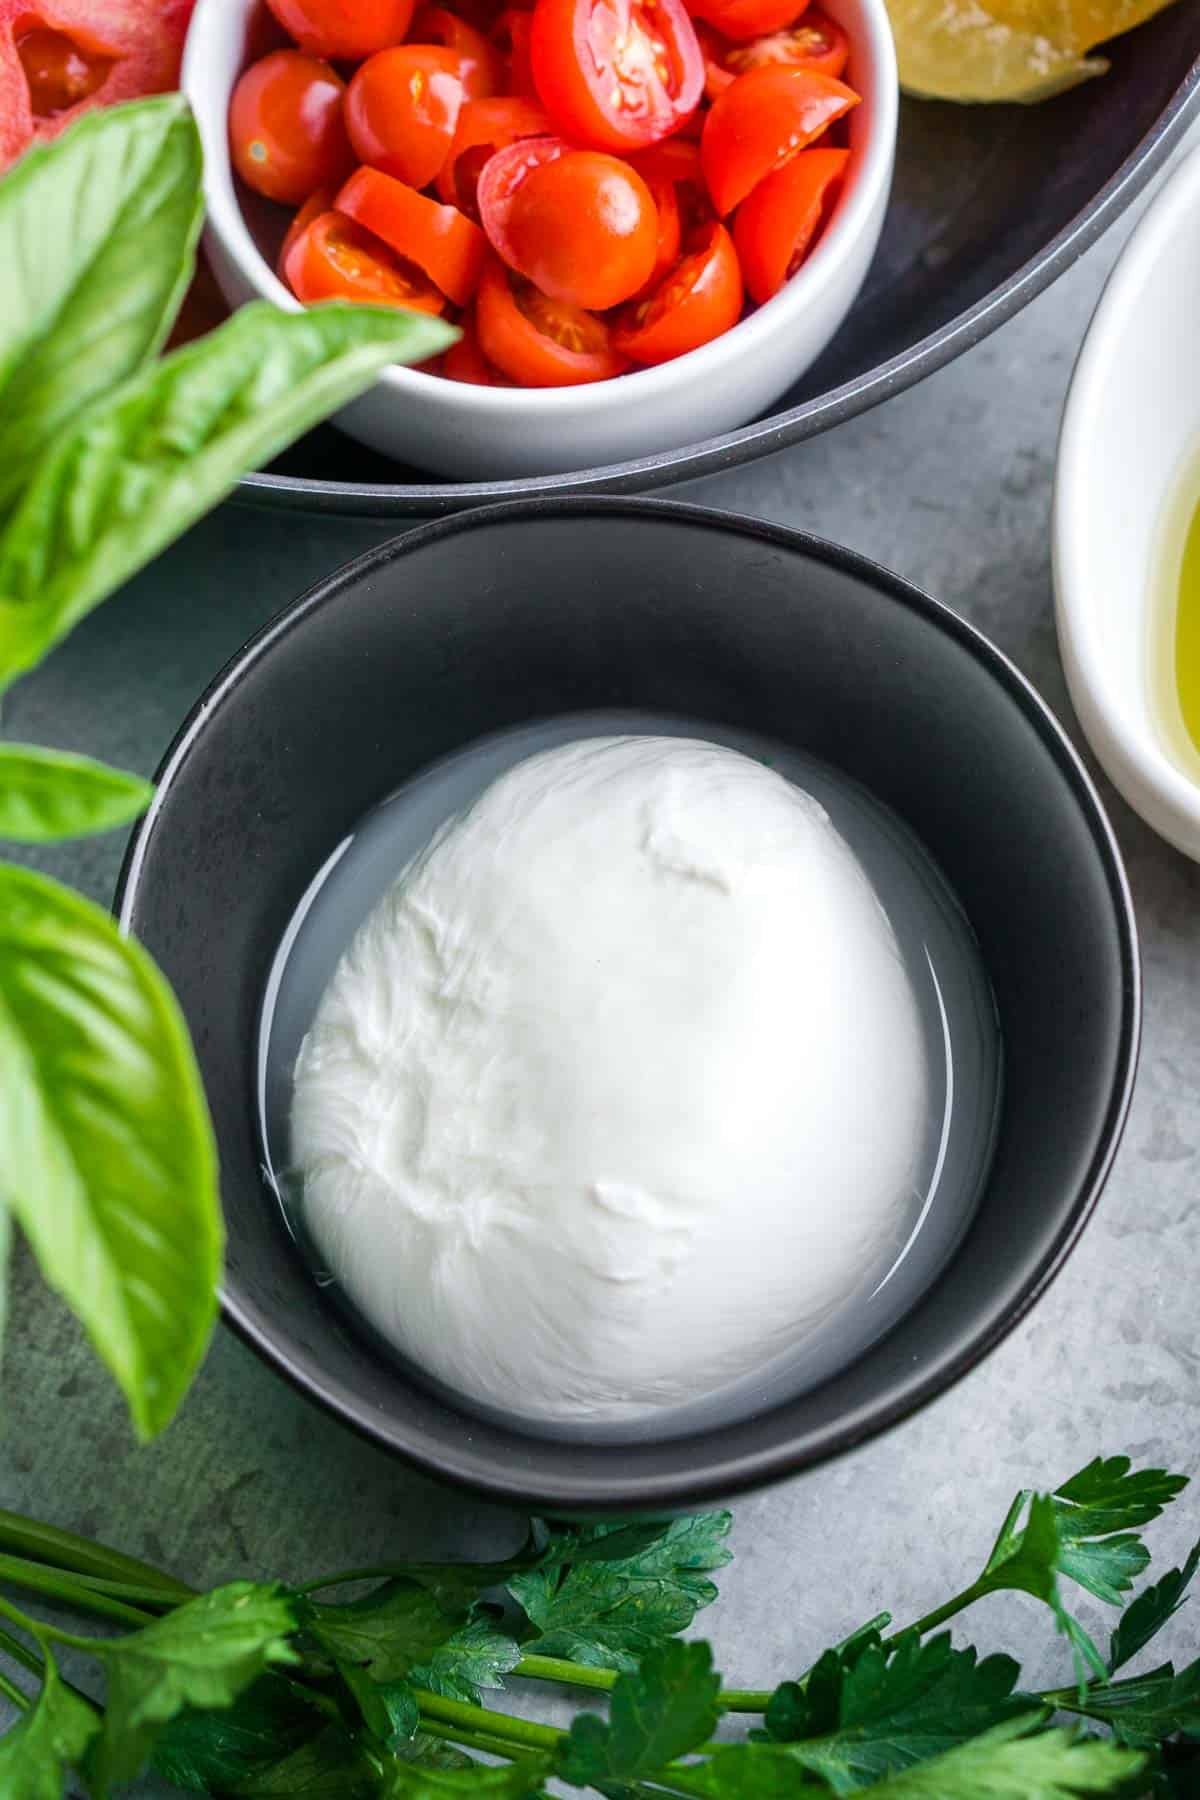 burrata cheese in black bowl next to tomatoes and fresh herbs